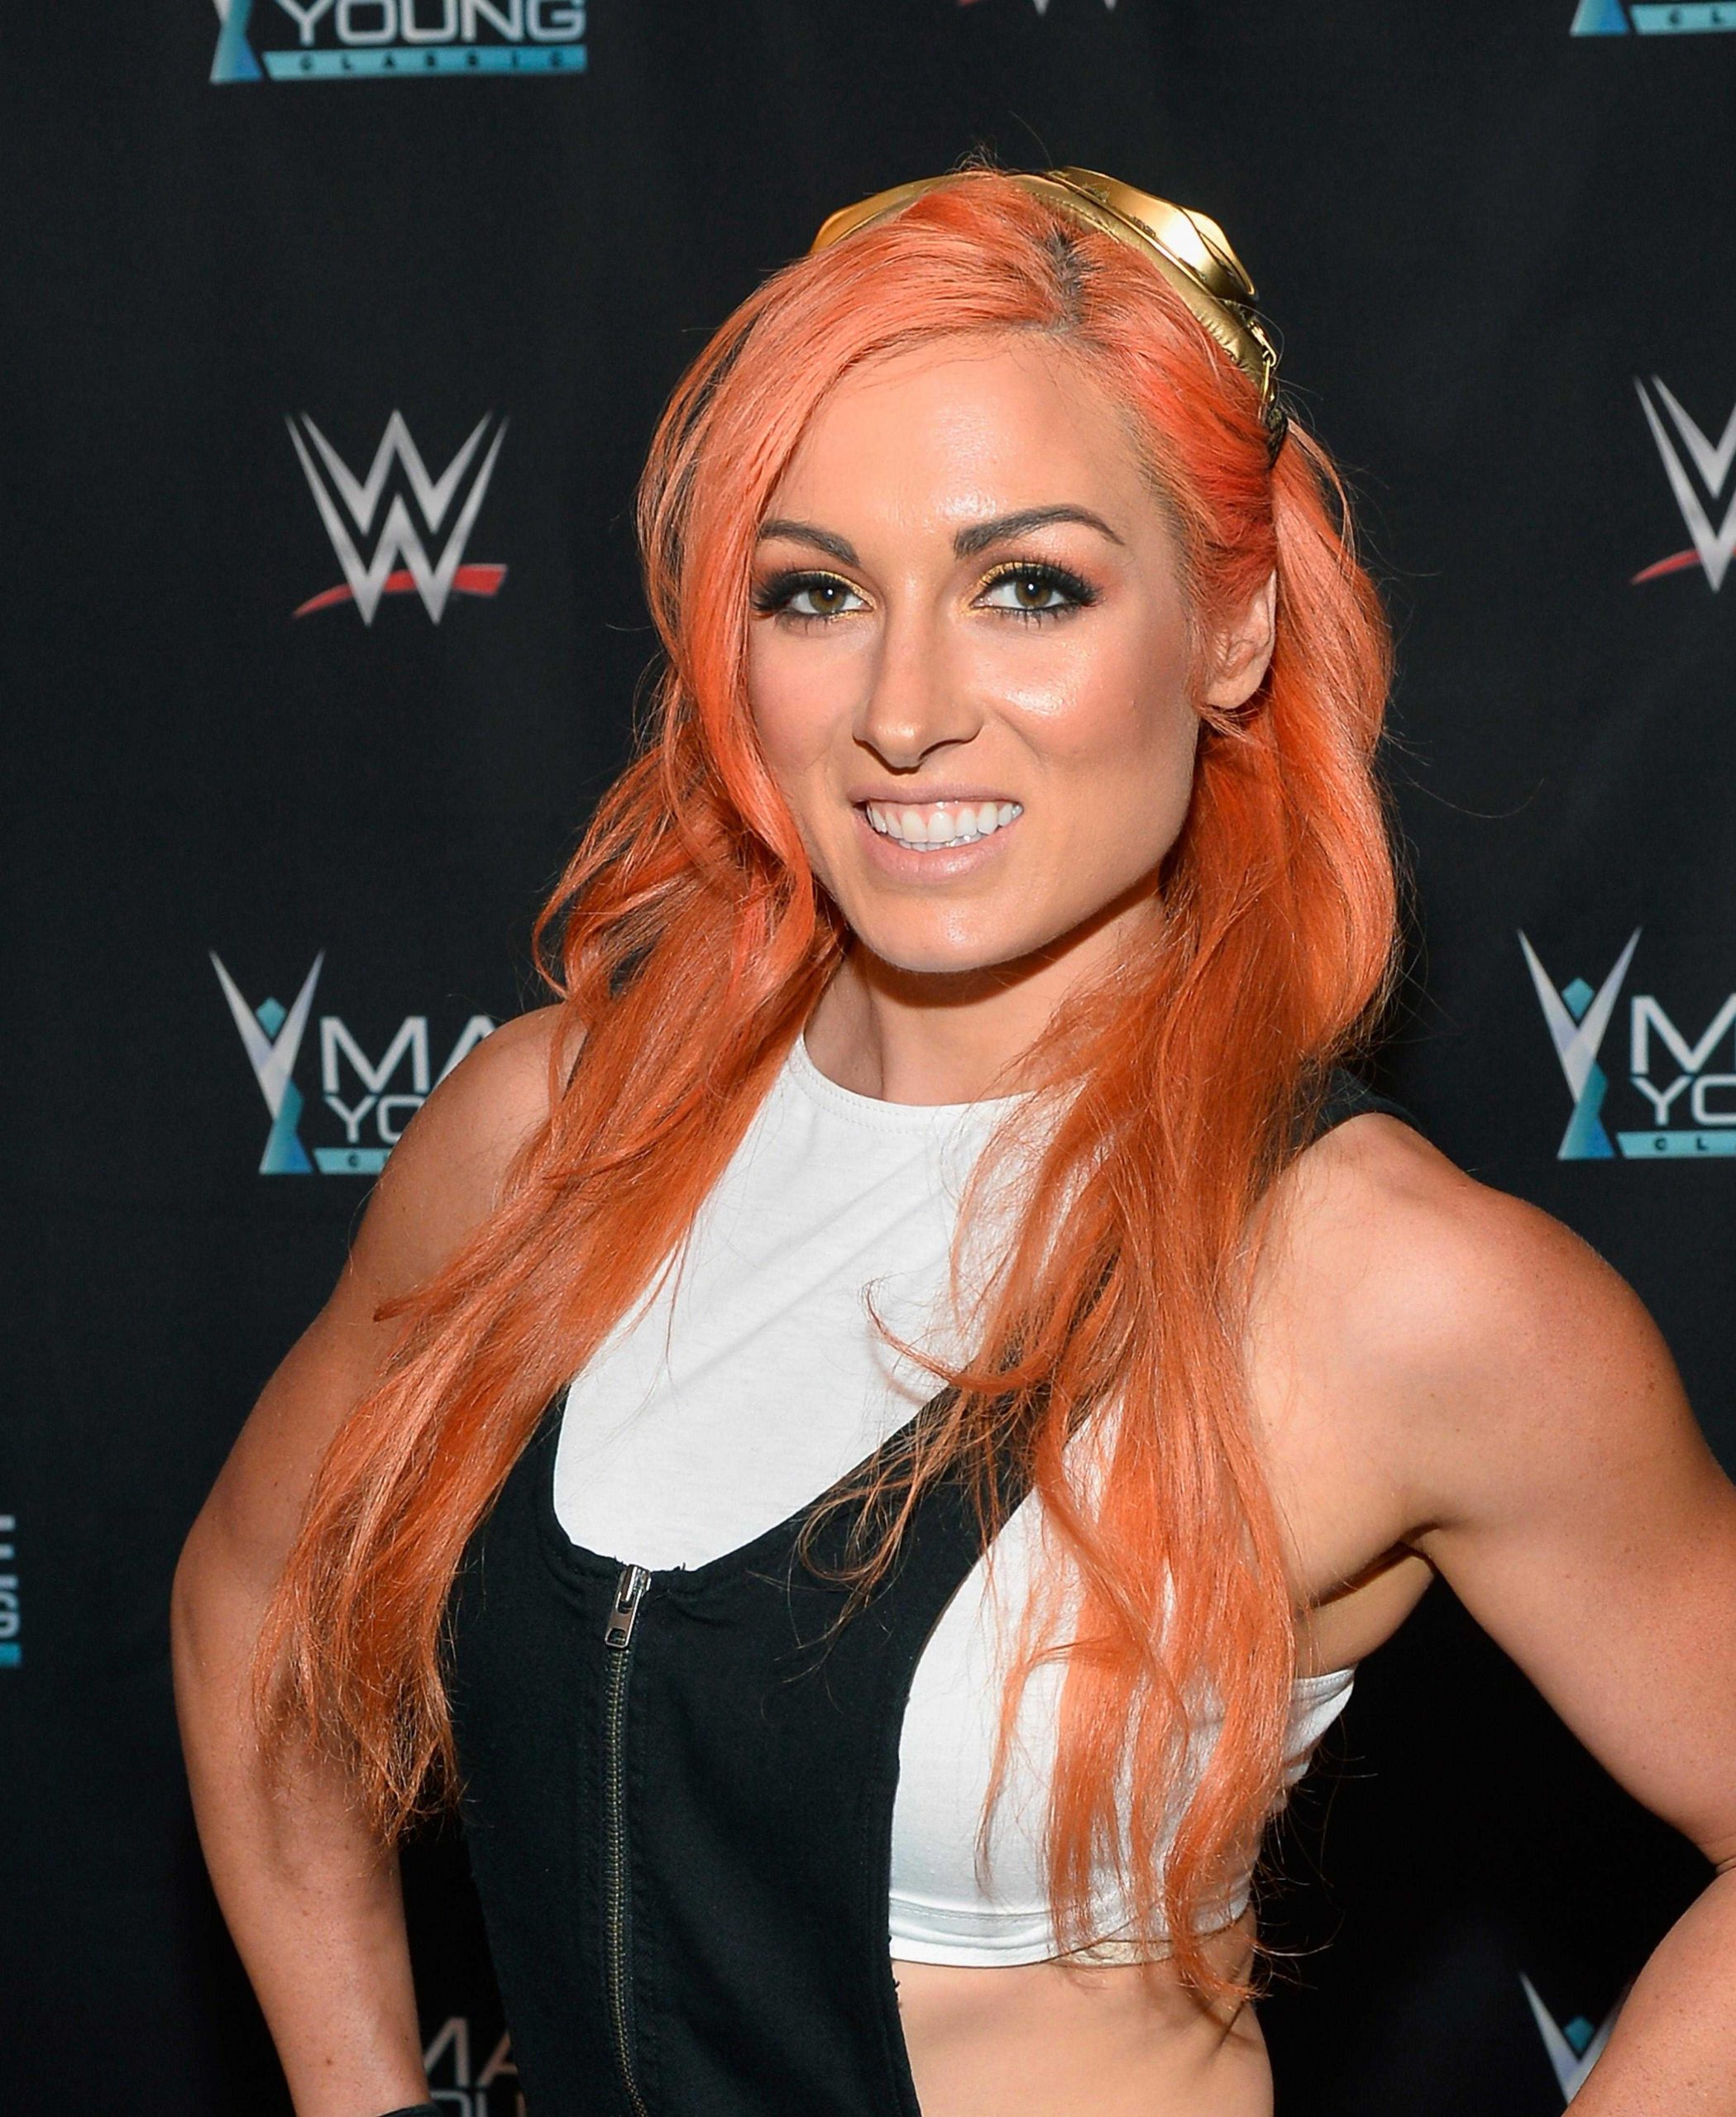 70+ Hot And Sexy Pictures of Becky Lynch – WWE Diva Will Sizzle You Up 128